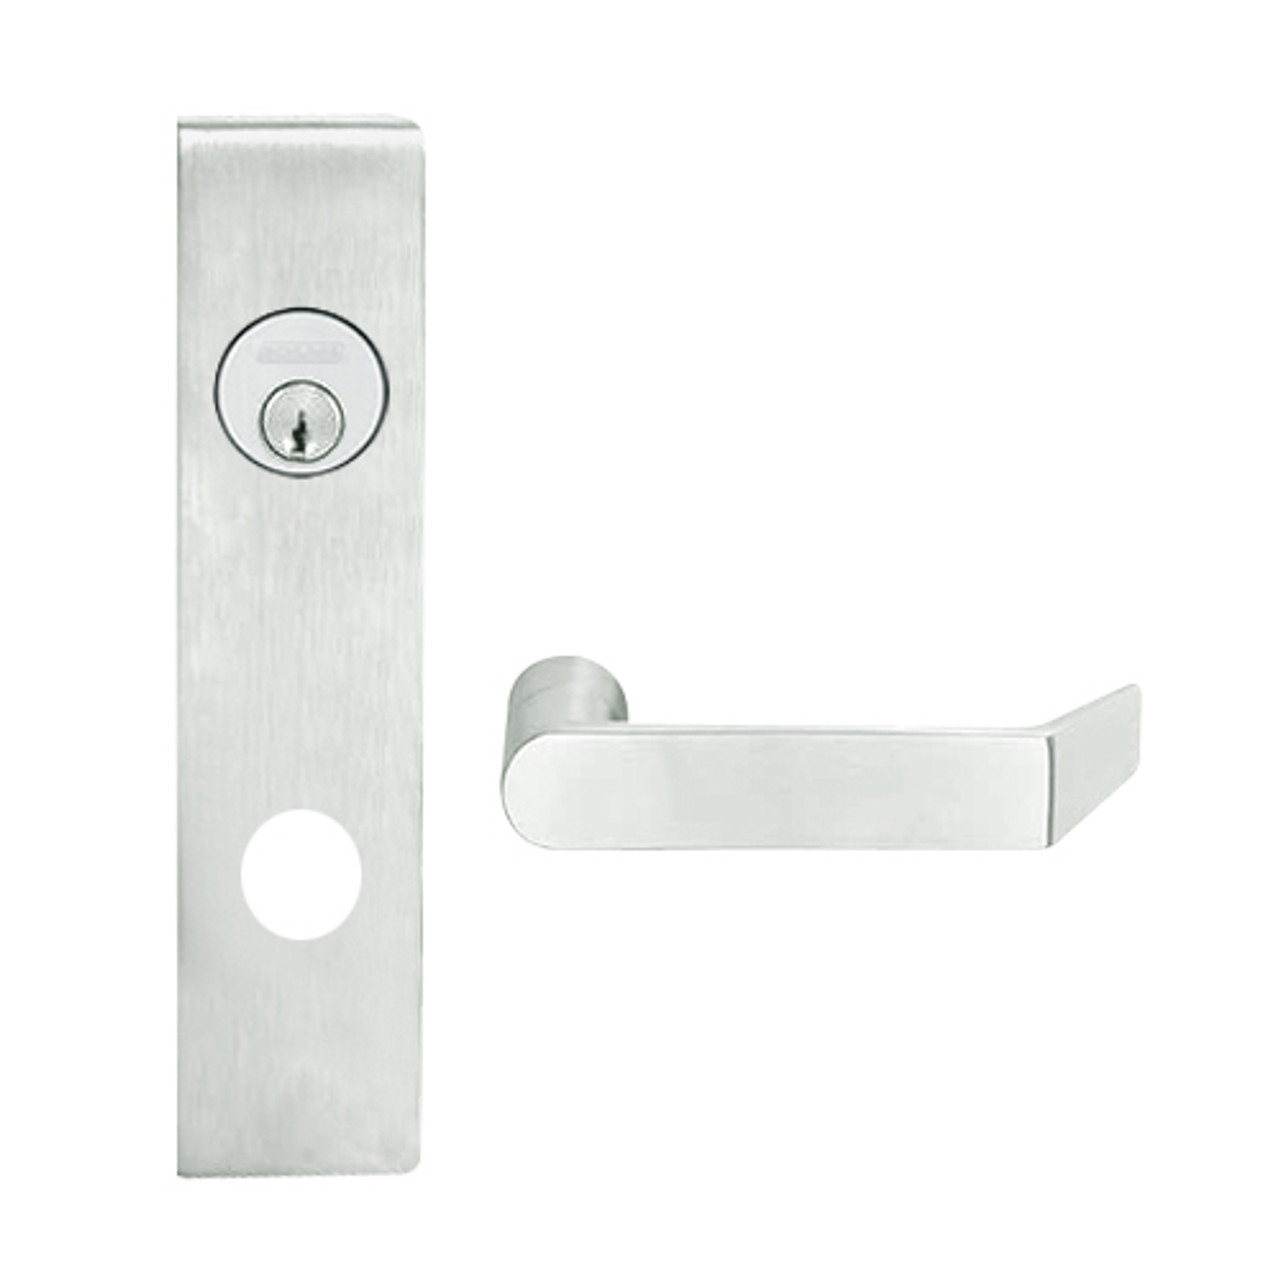 L9026L-06L-619 Schlage L Series Less Cylinder Exit Lock with Cylinder Commercial Mortise Lock with 06 Cast Lever Design in Satin Nickel